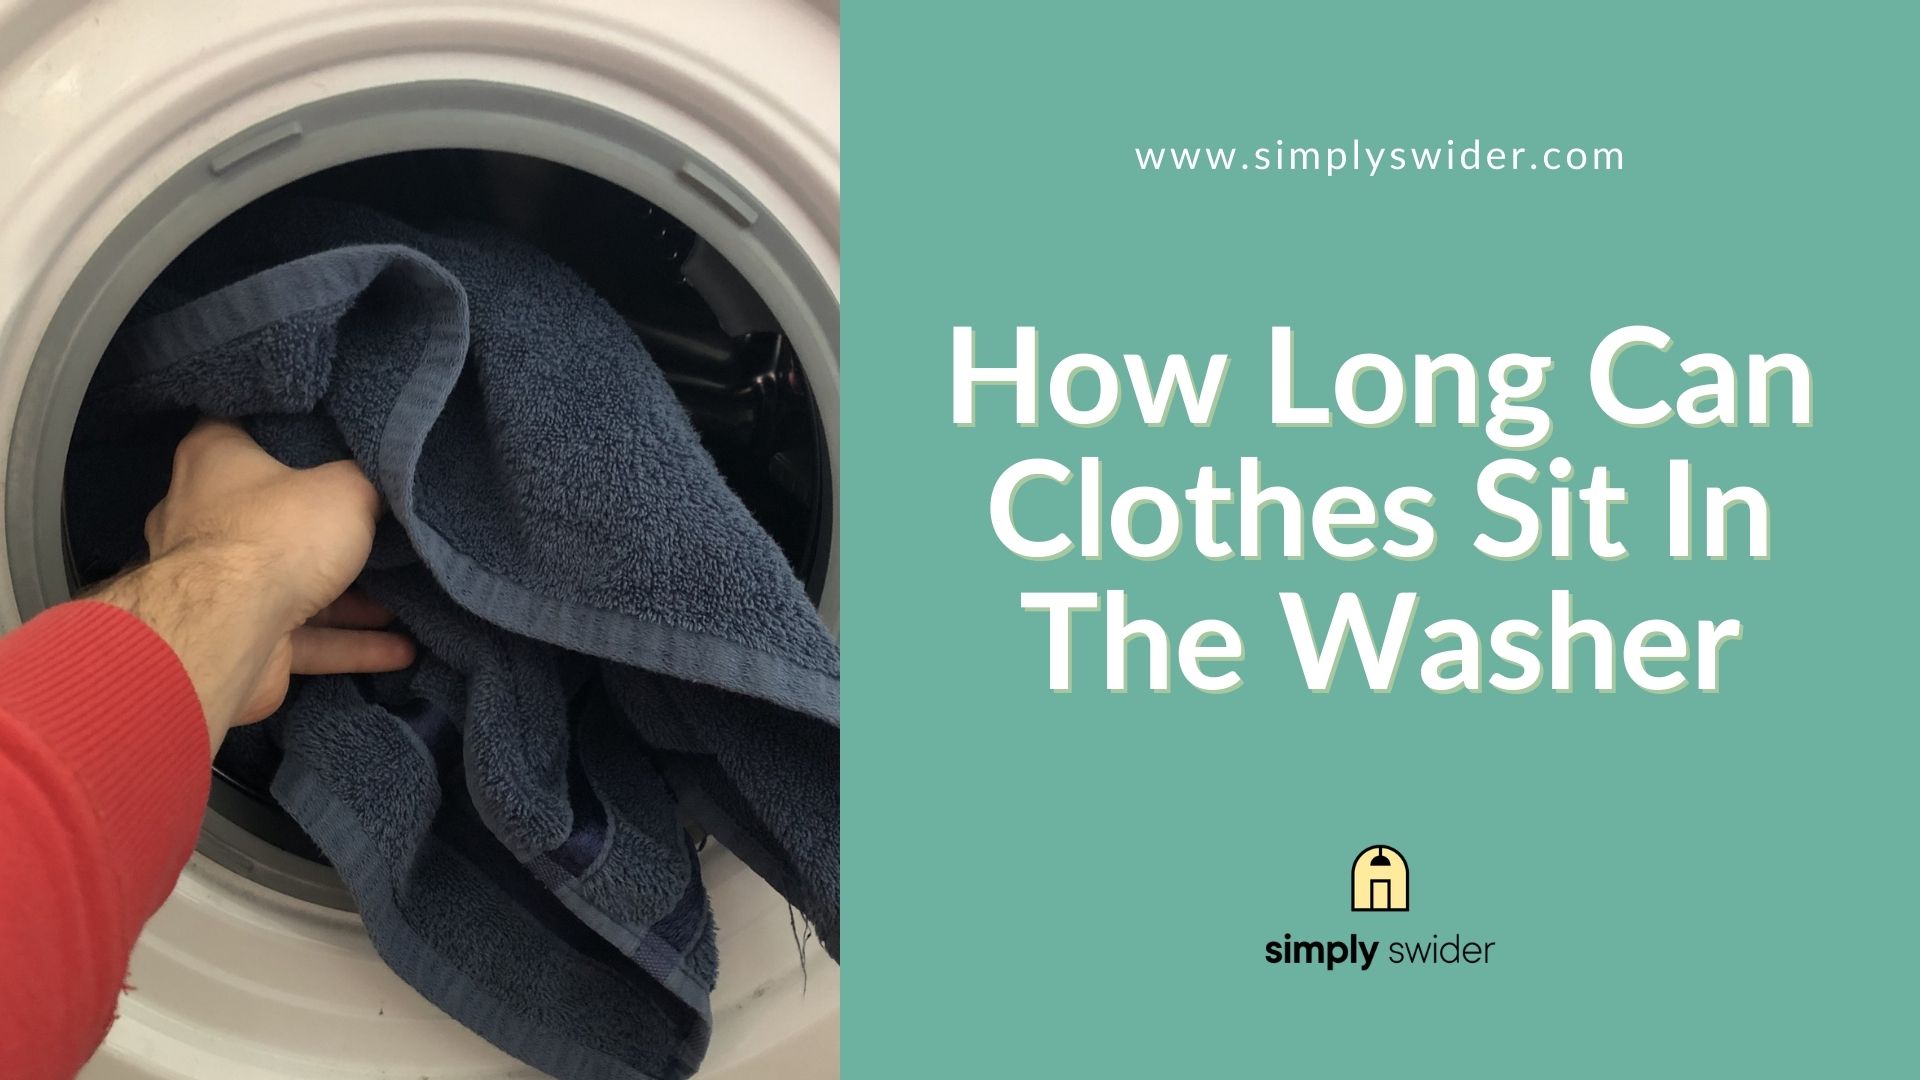 How Long Can Clothes Sit In The Washer